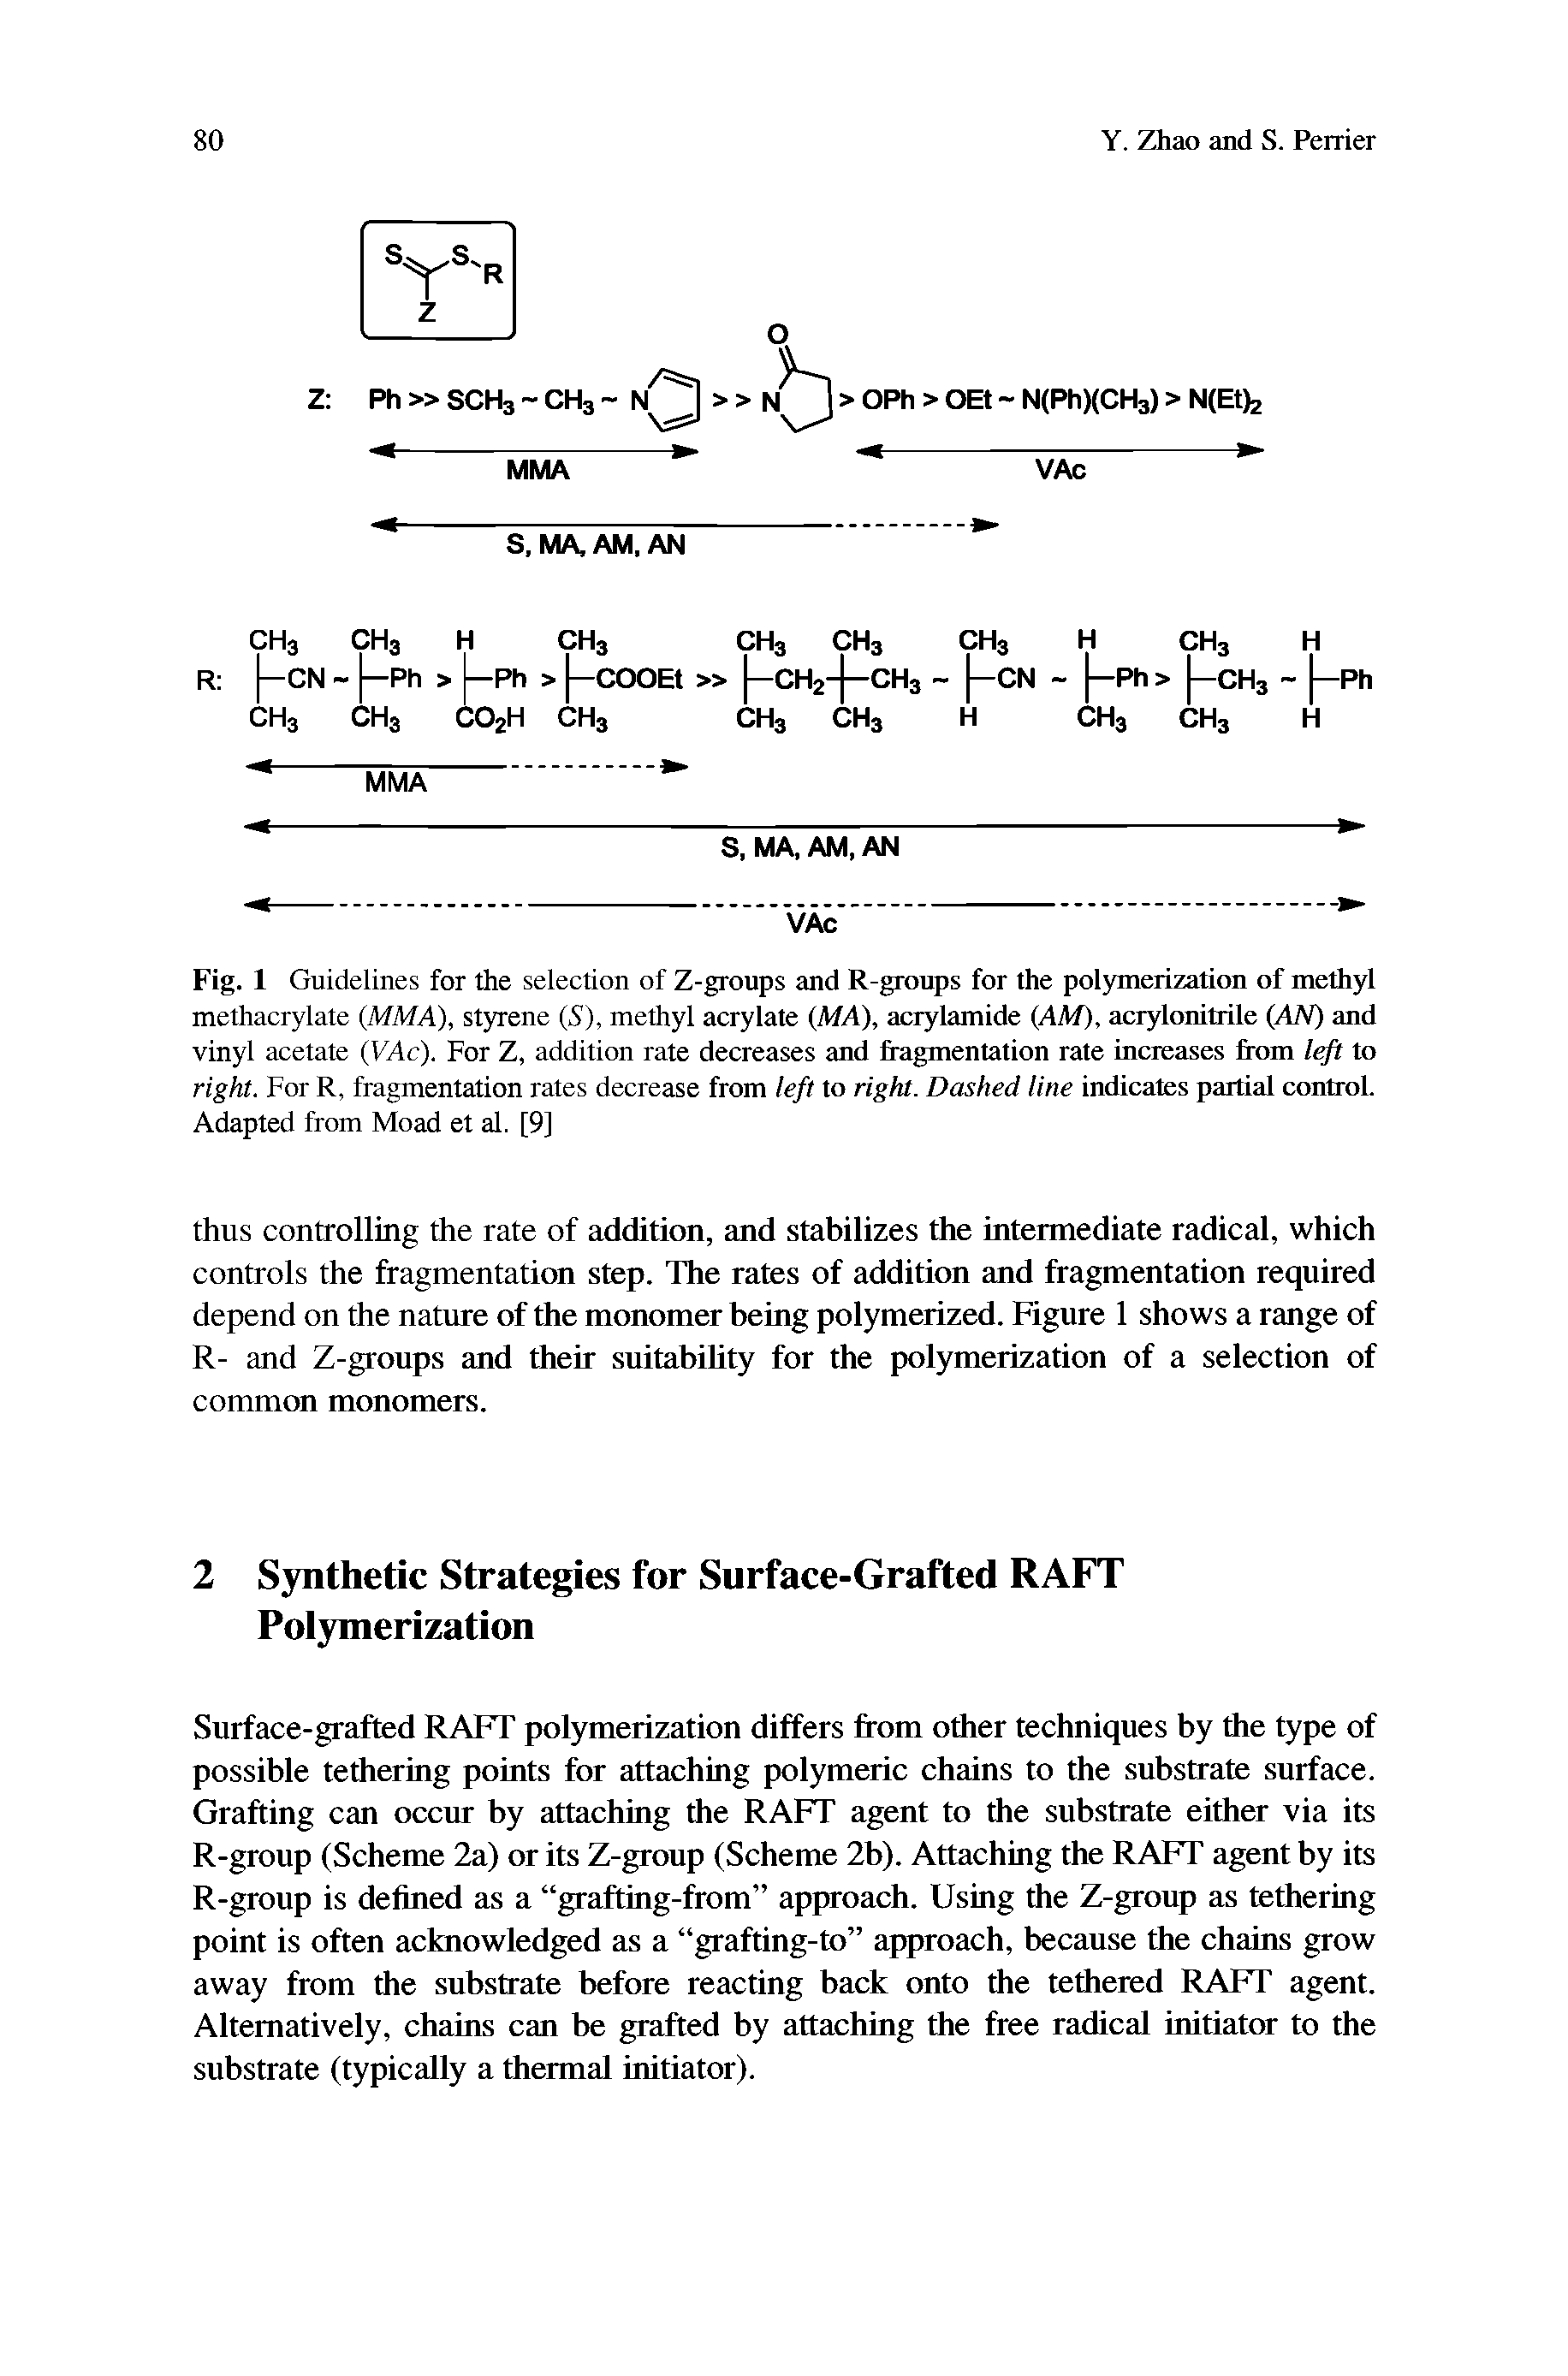 Fig. 1 Guidelines for the selection of Z-groups and R-groups for the polymerization of methyl methacrylate MMA), styrene (5), methyl acrylate MA), acrylamide AM), acrylonitrile AN) and vinyl acetate (VAc). For Z, addition rate decreases and fragmentation rate increases from to right. For R, fragmentation rates decrease from left to right. Dashed line indicates partial controL Adapted from Moad et al. [9]...